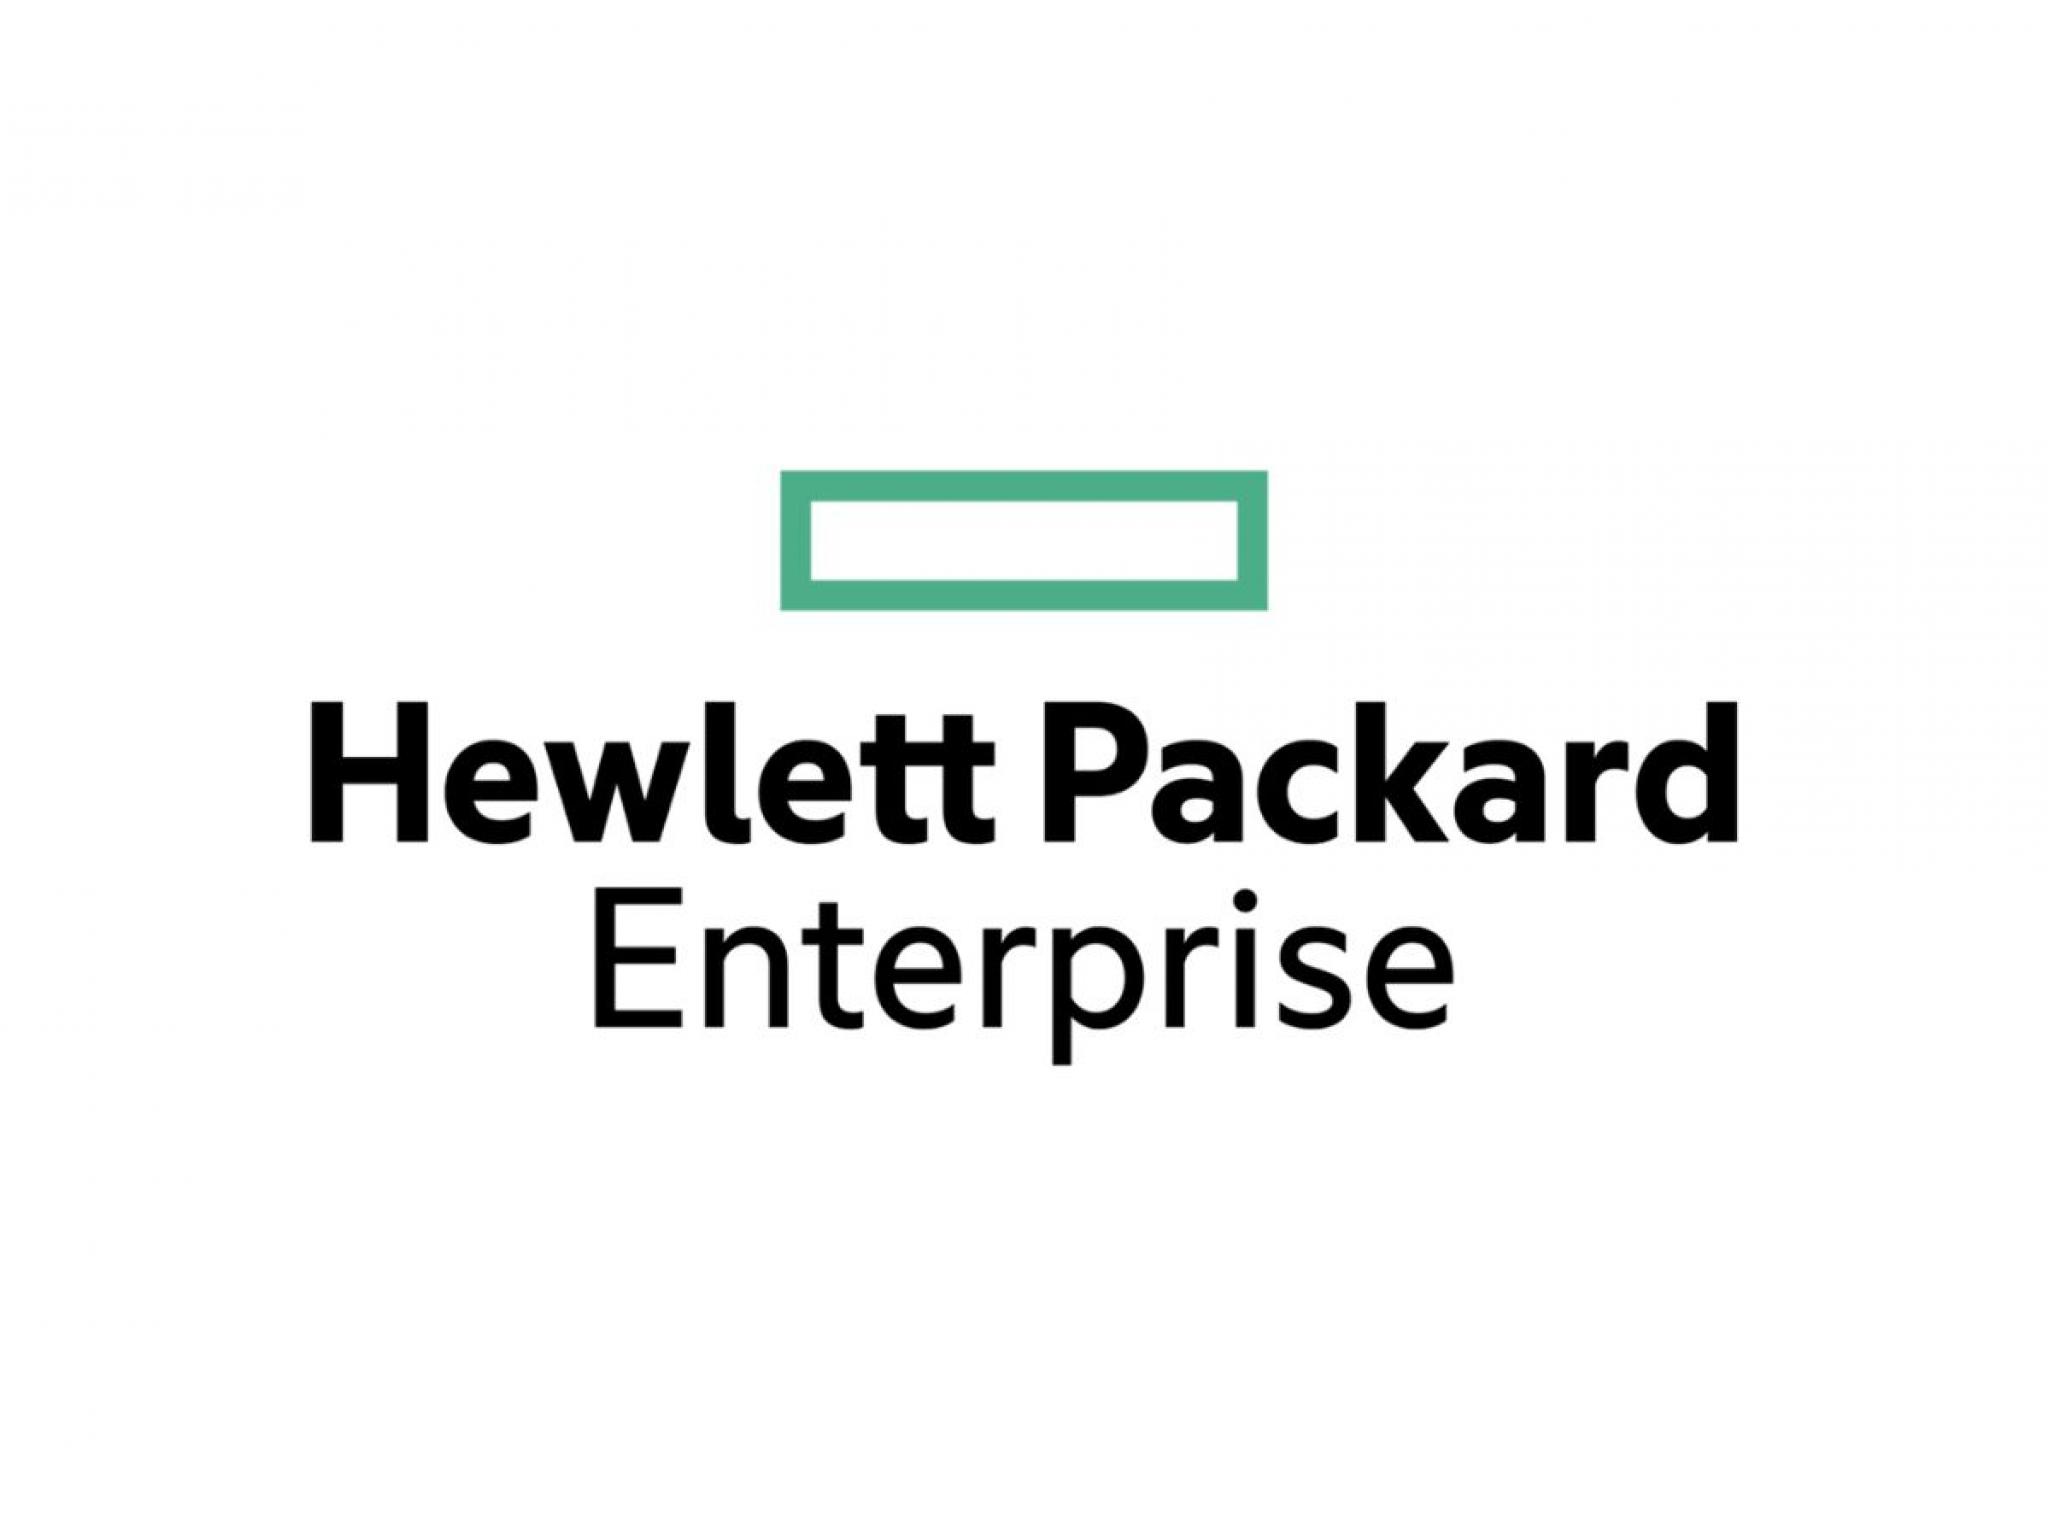  hewlett-packard-enterprise-hologic-and-other-big-stocks-moving-lower-in-tuesdays-pre-market-session 